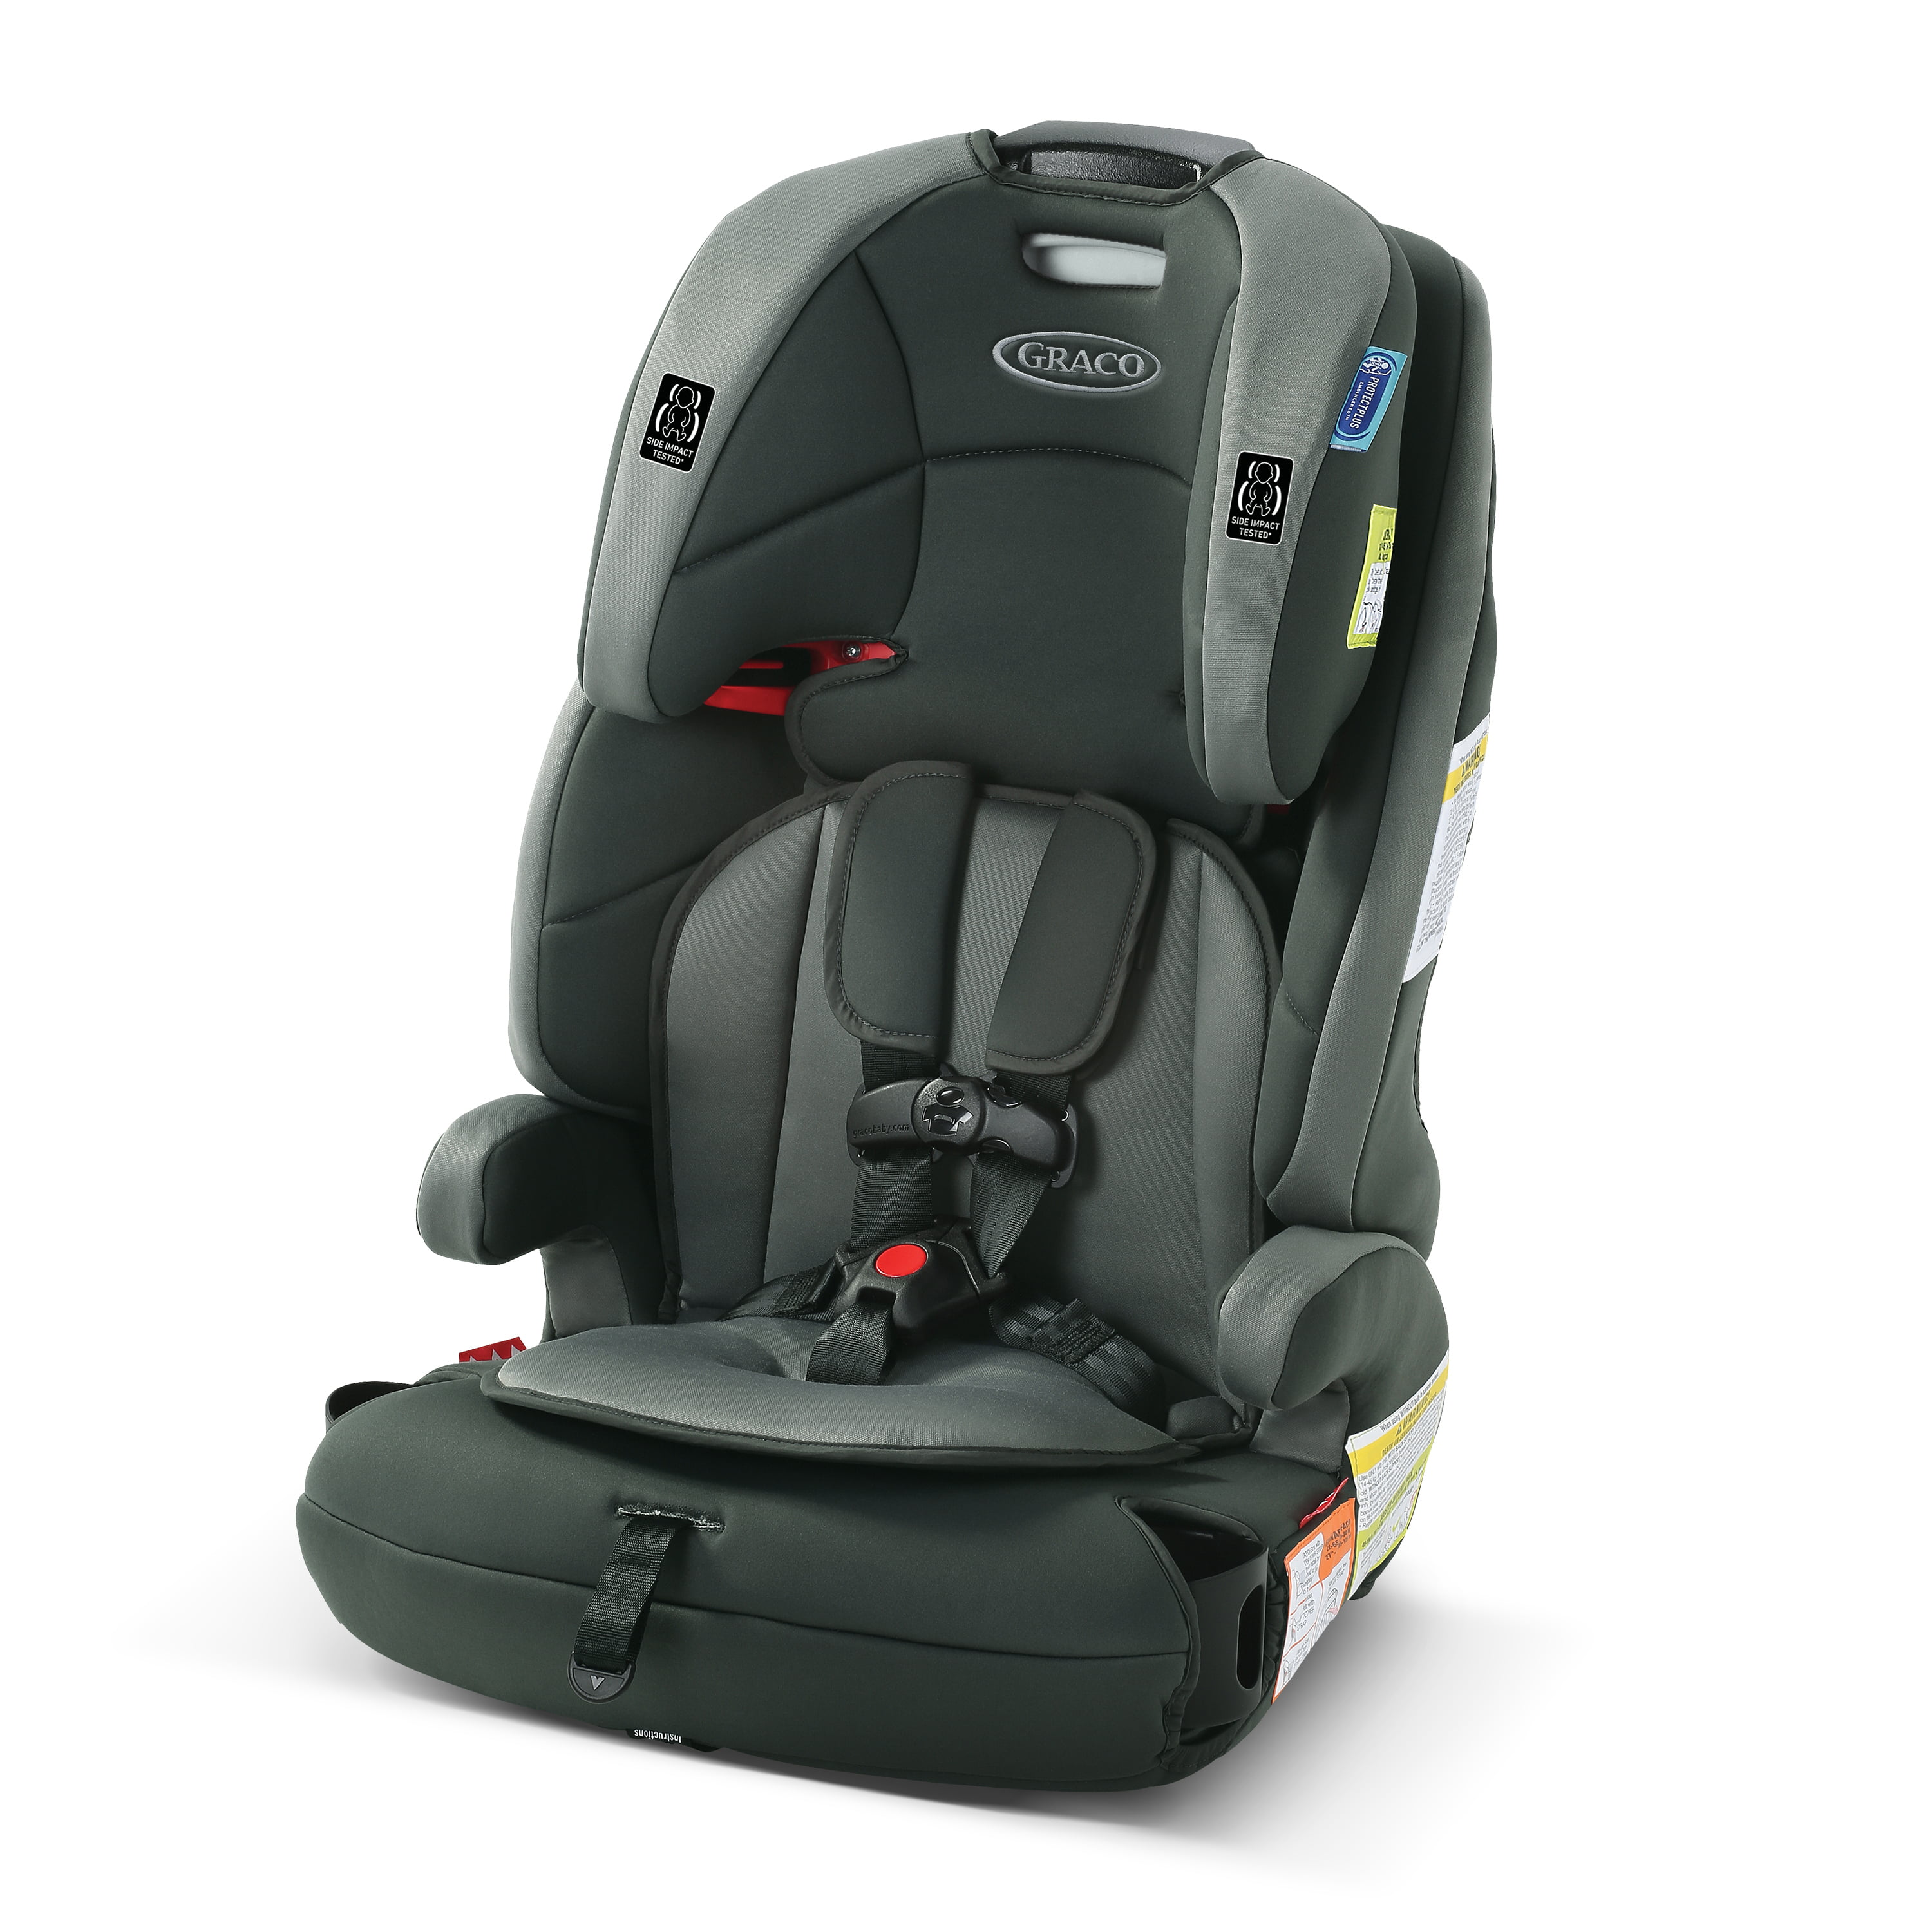 Graco Tranzitions Backless and High-back Booster Car Seat, Gray - Walmart.com $99.97